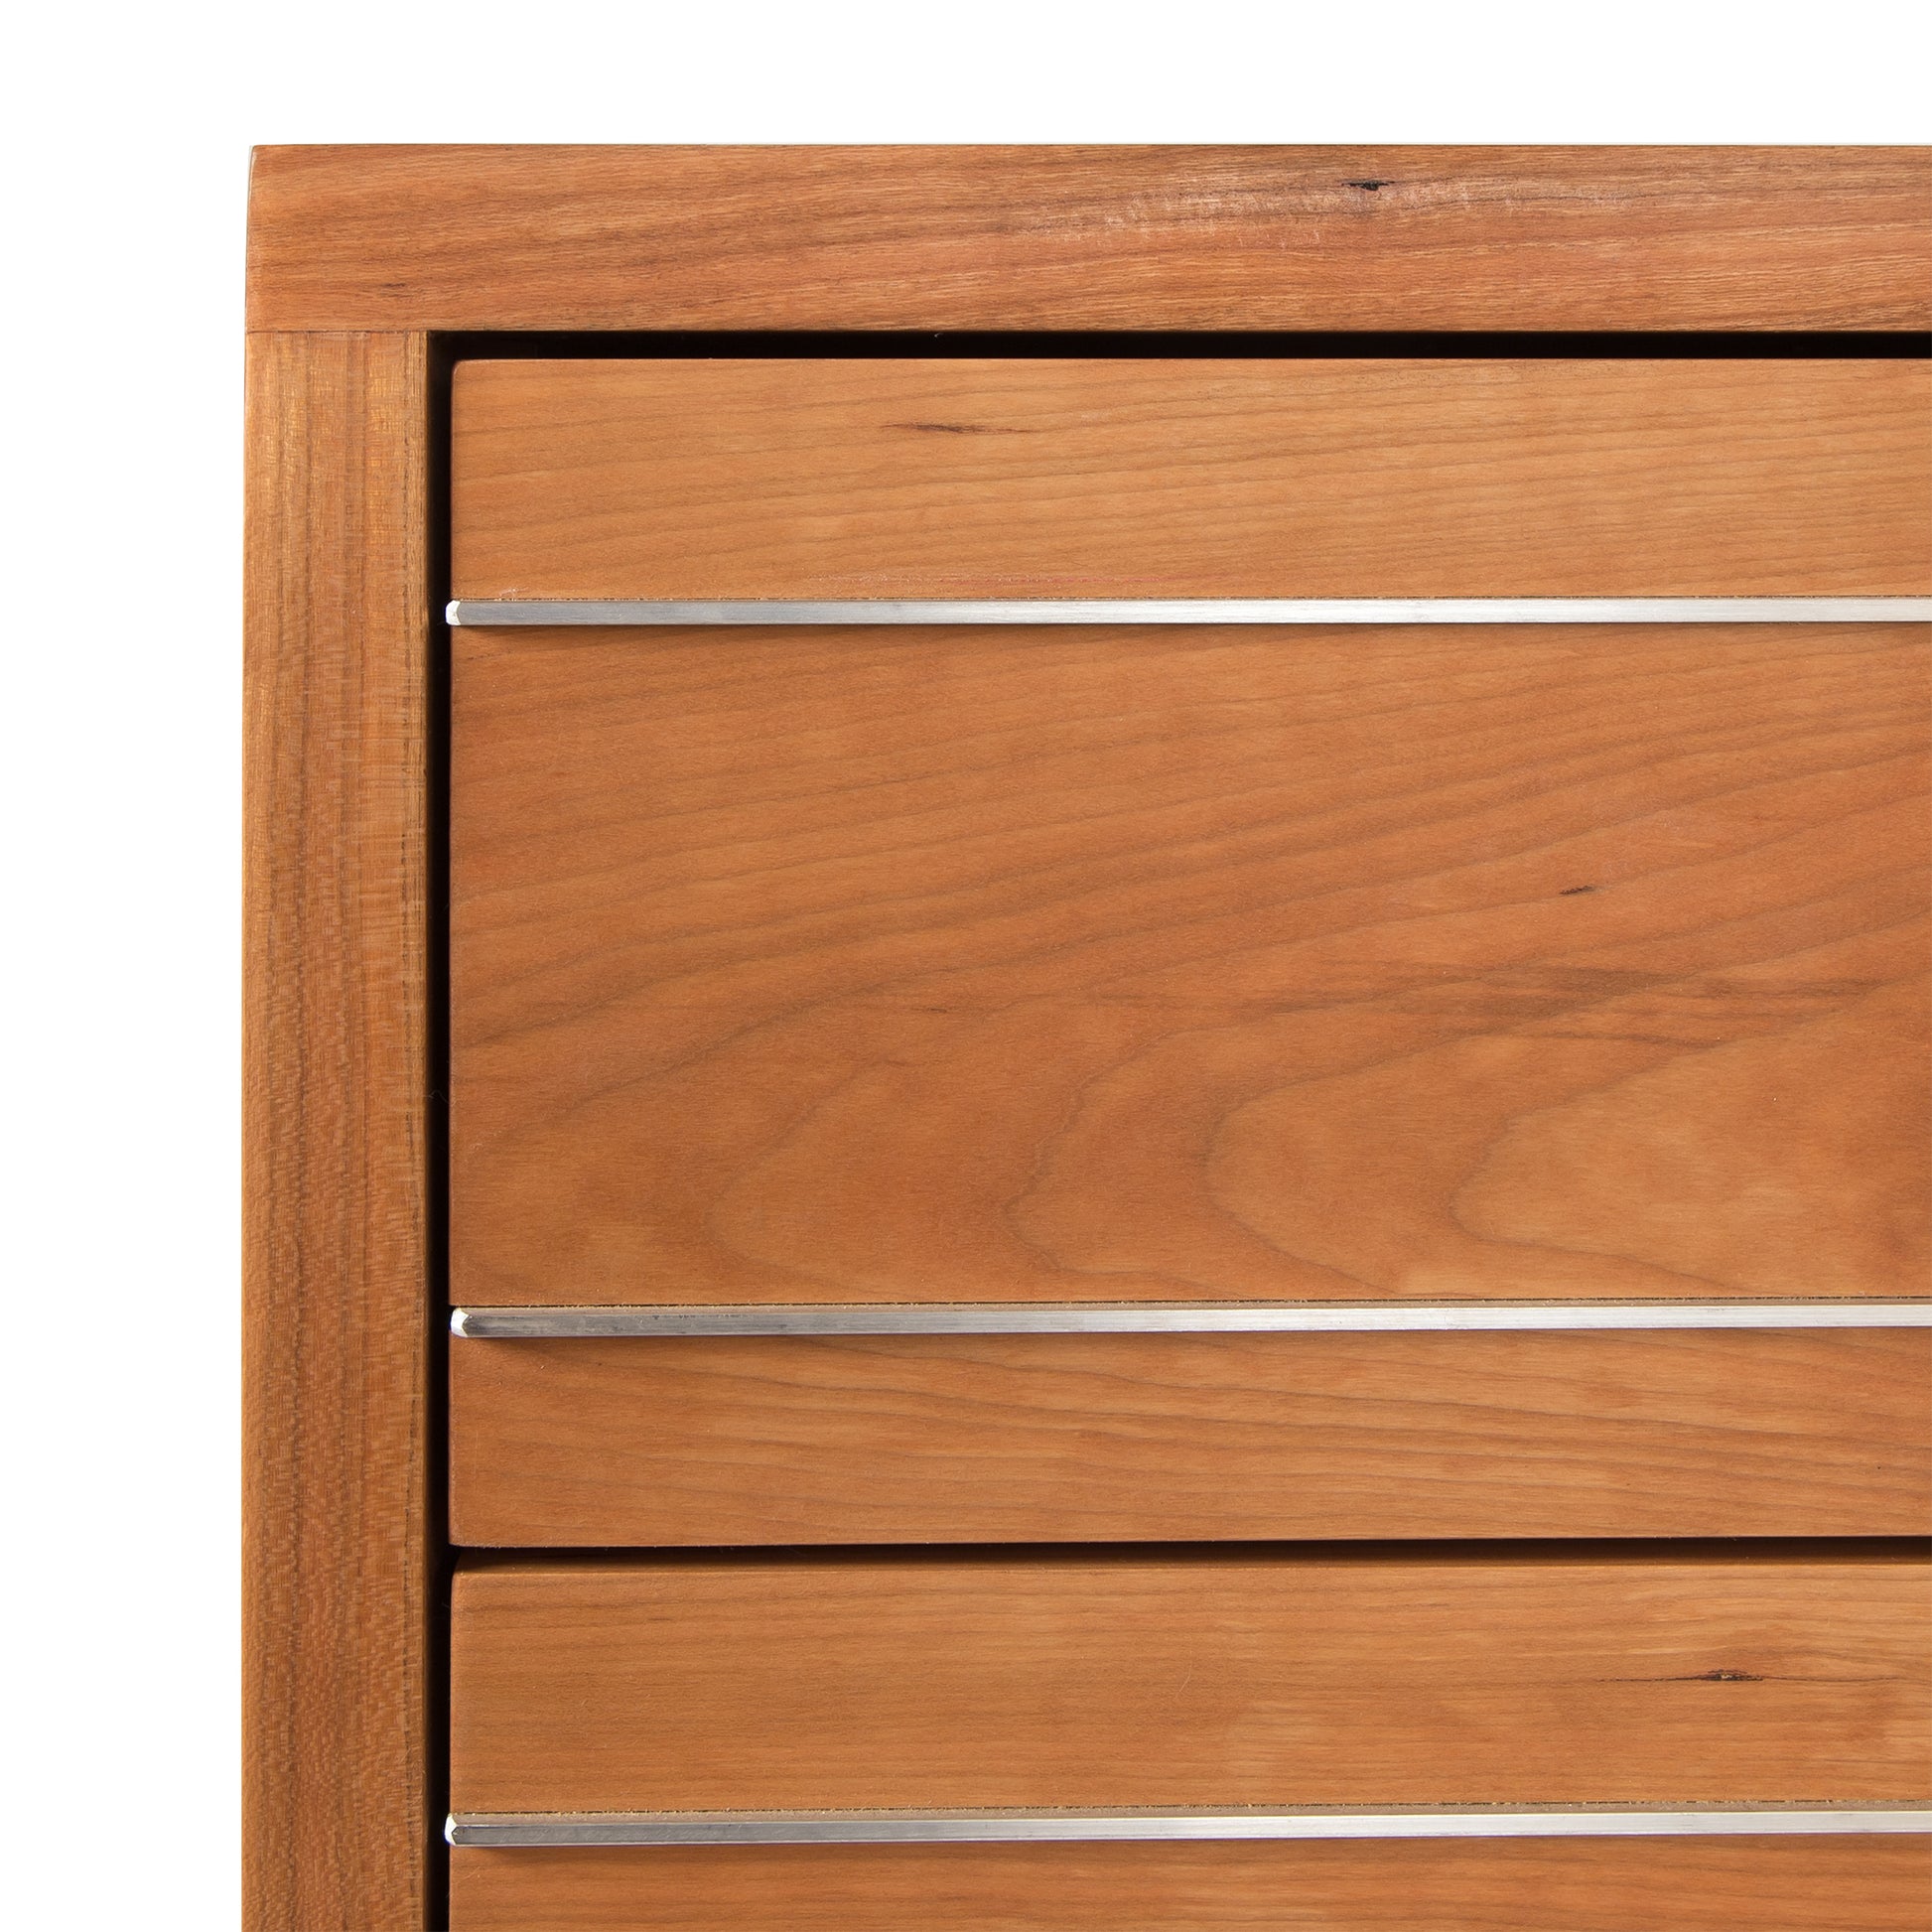 A Vermont Furniture Designs handcrafted Contemporary Cable 3-Drawer Chest with horizontal slats and metal handles on a white background.